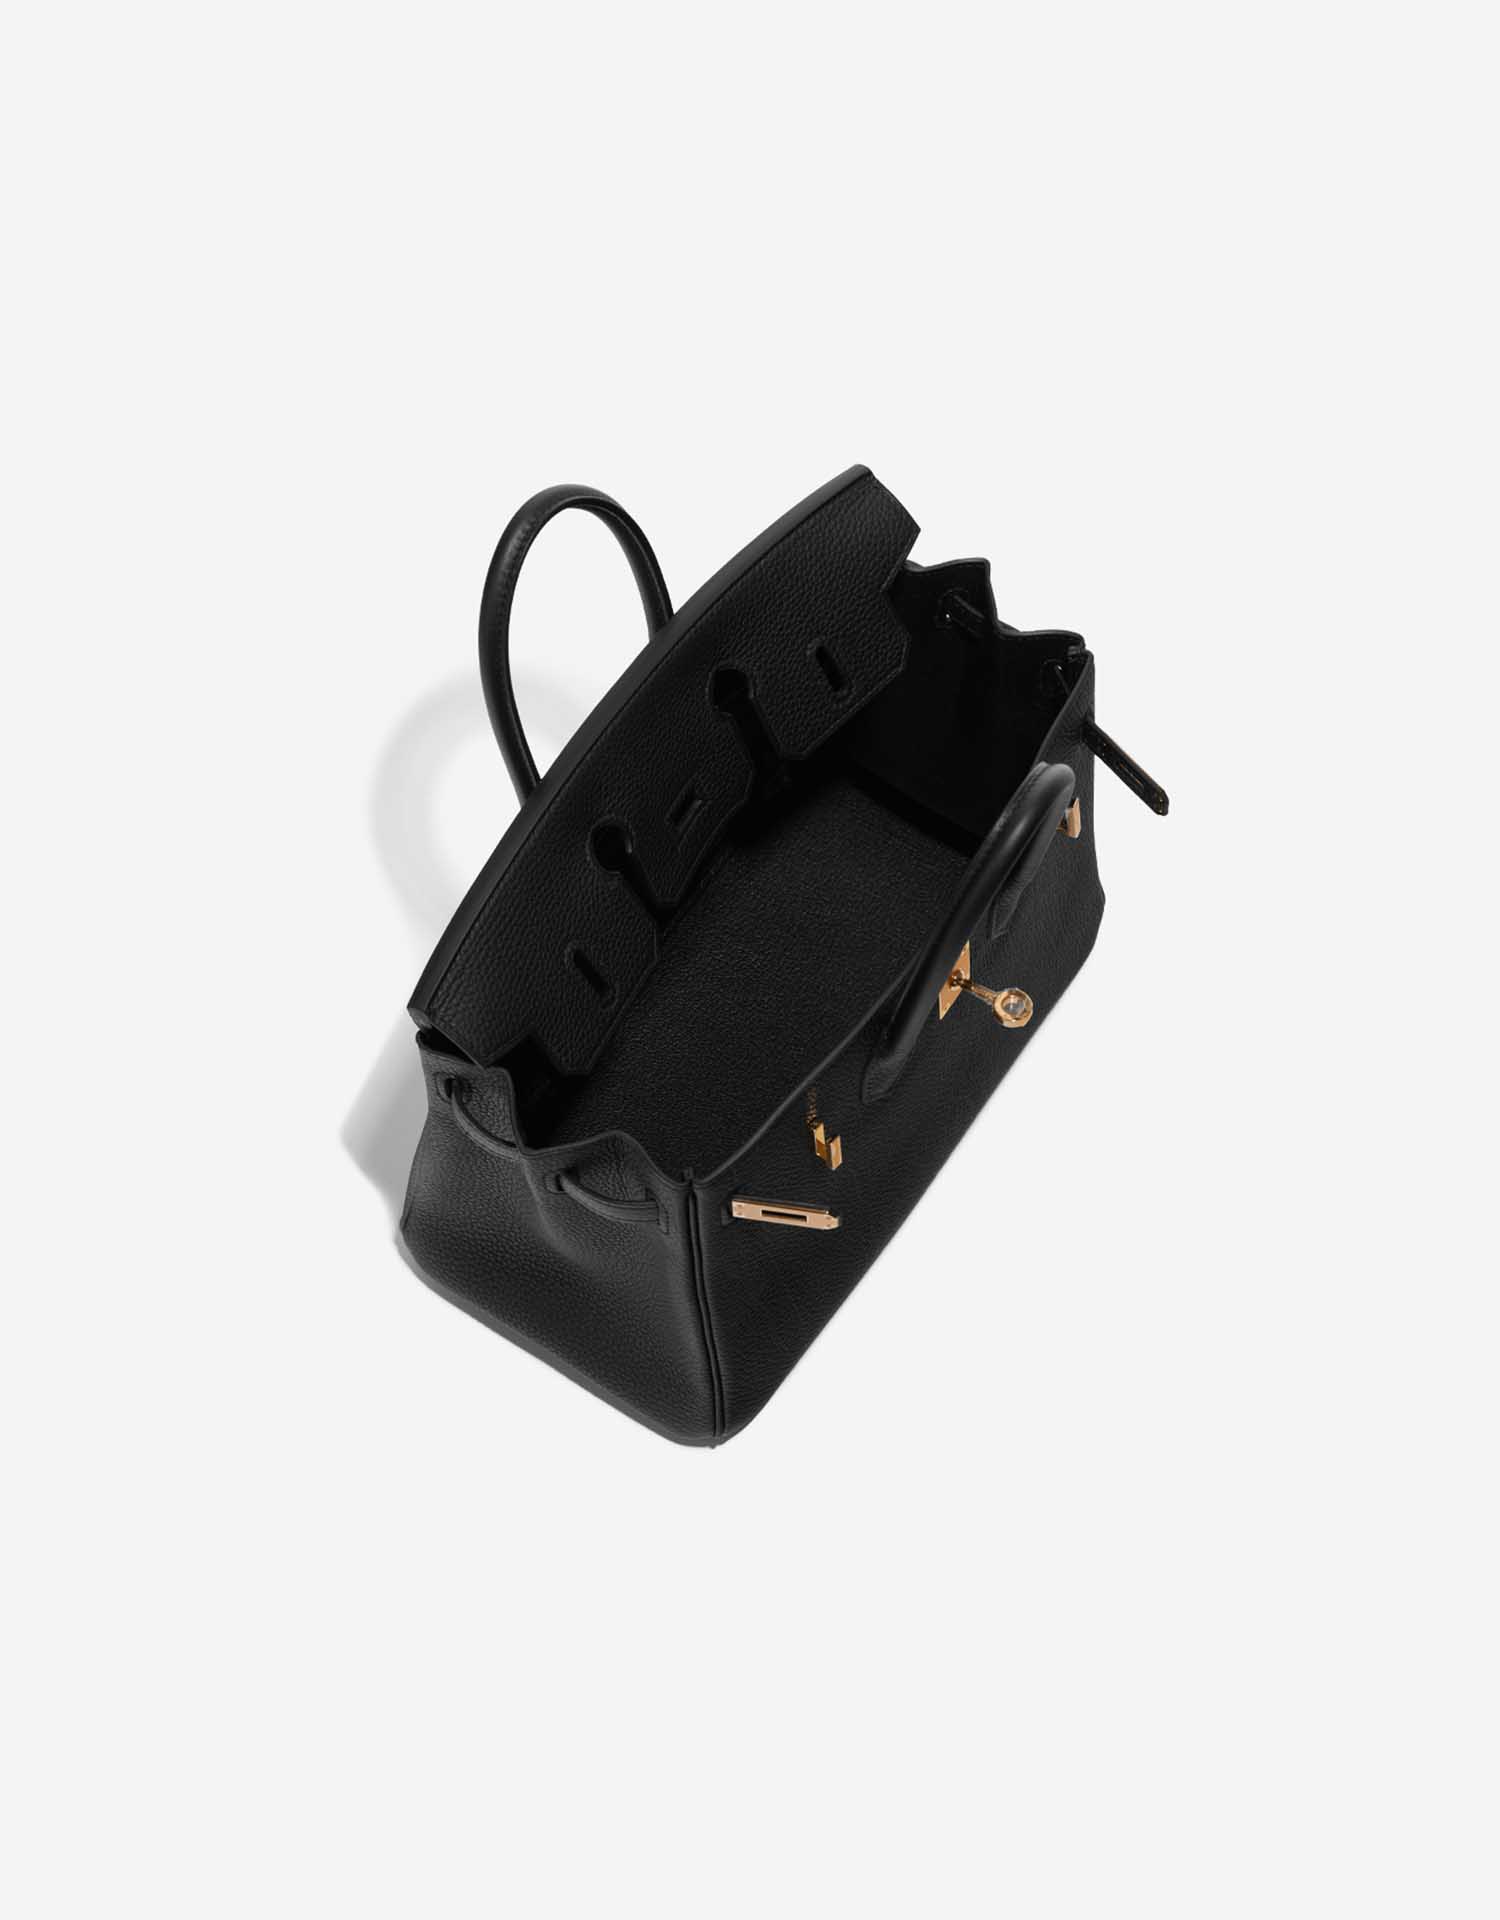 Hermes Birkin 25 Black Togo GHW – Consign of the Times ™